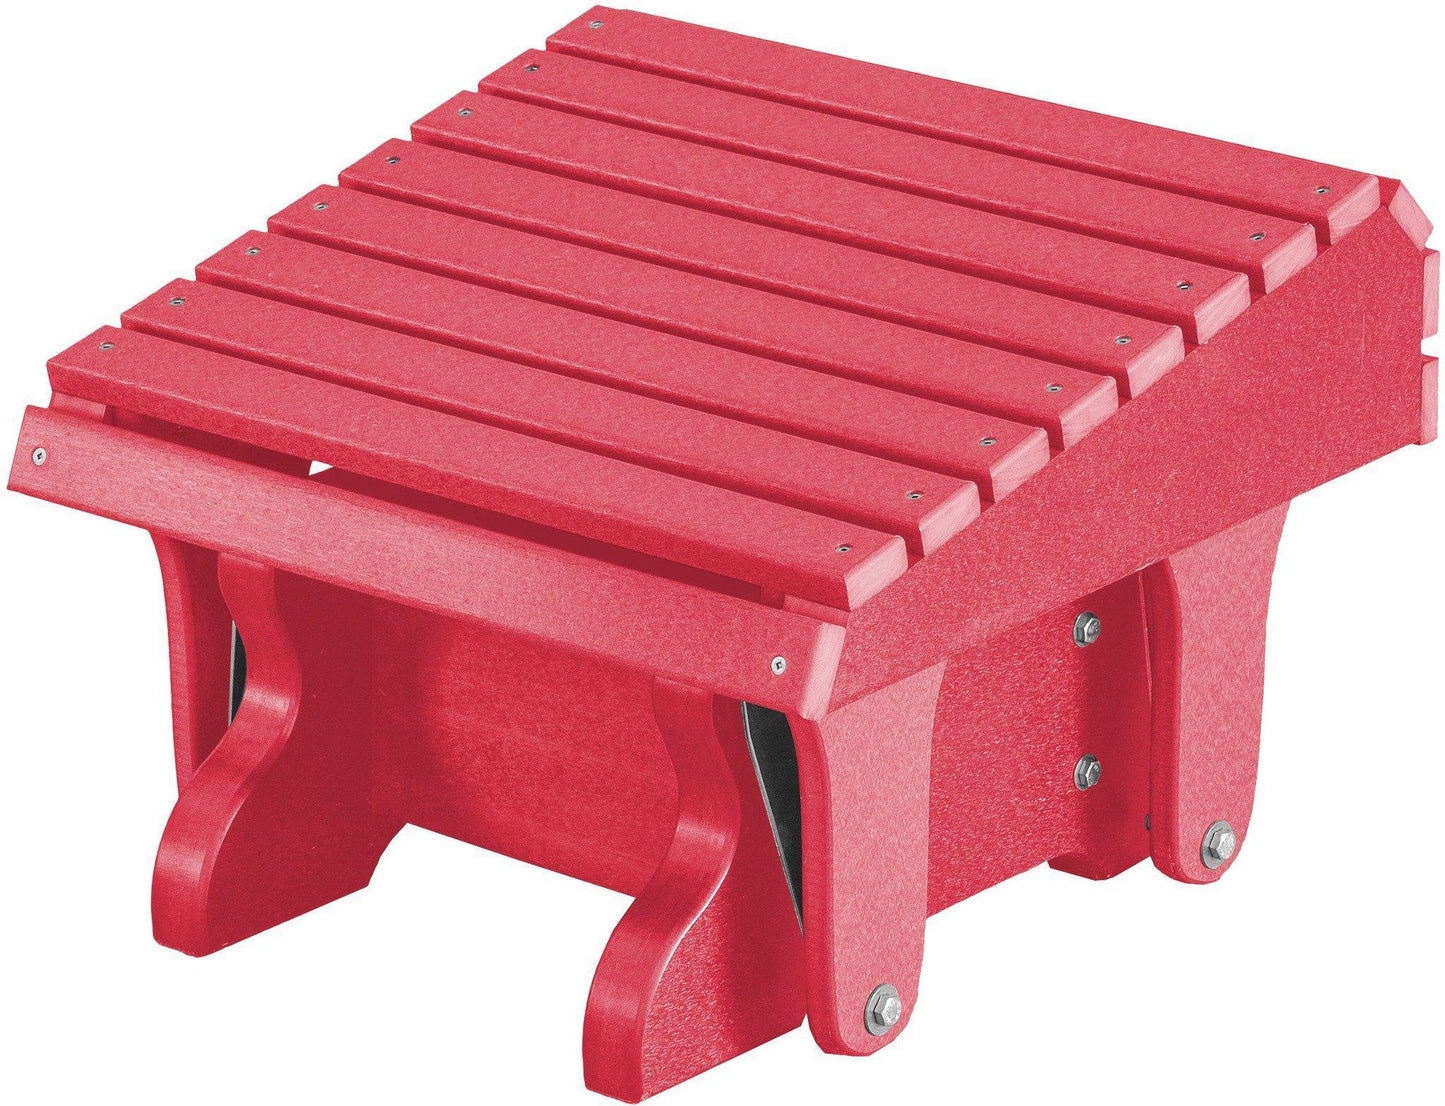 Wildridge Recycled Plastic Heritage Gliding Footrest (QUICK SHIP) - LEAD TIME TO SHIP 3 TO 4 BUSINESS DAYS